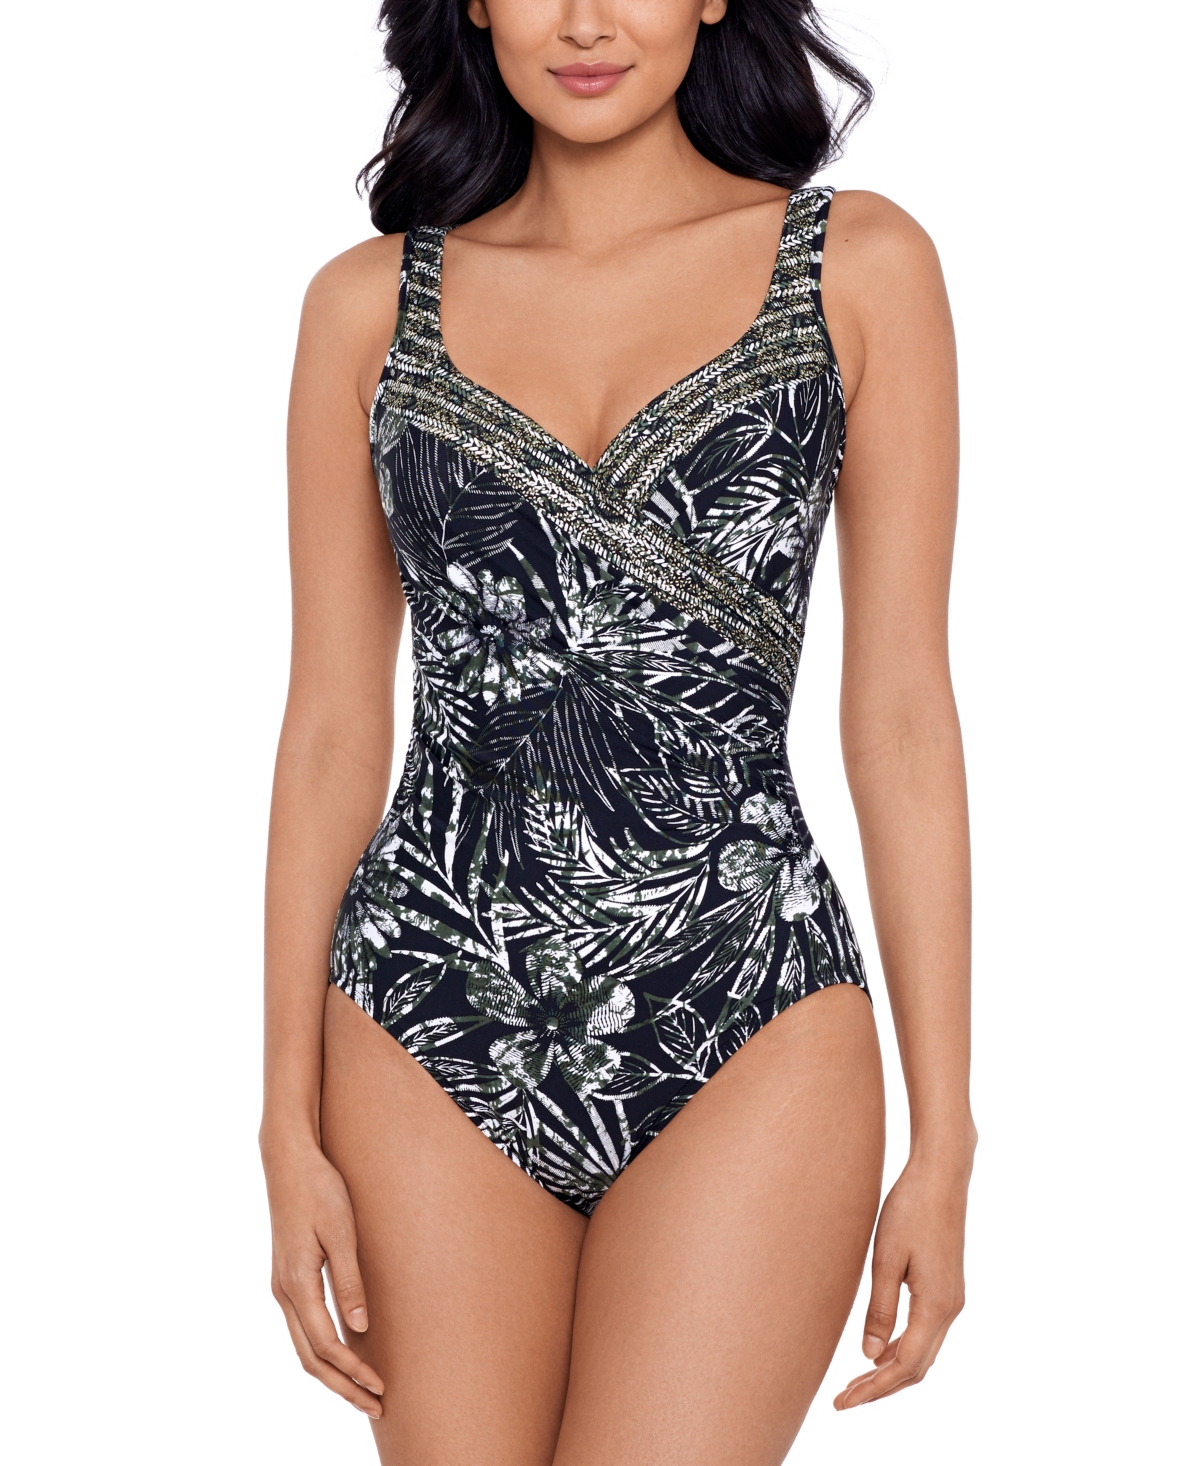 Shop Miraclesuit Women's Zahara Its A Wrap Underwire One-piece Swimsuit